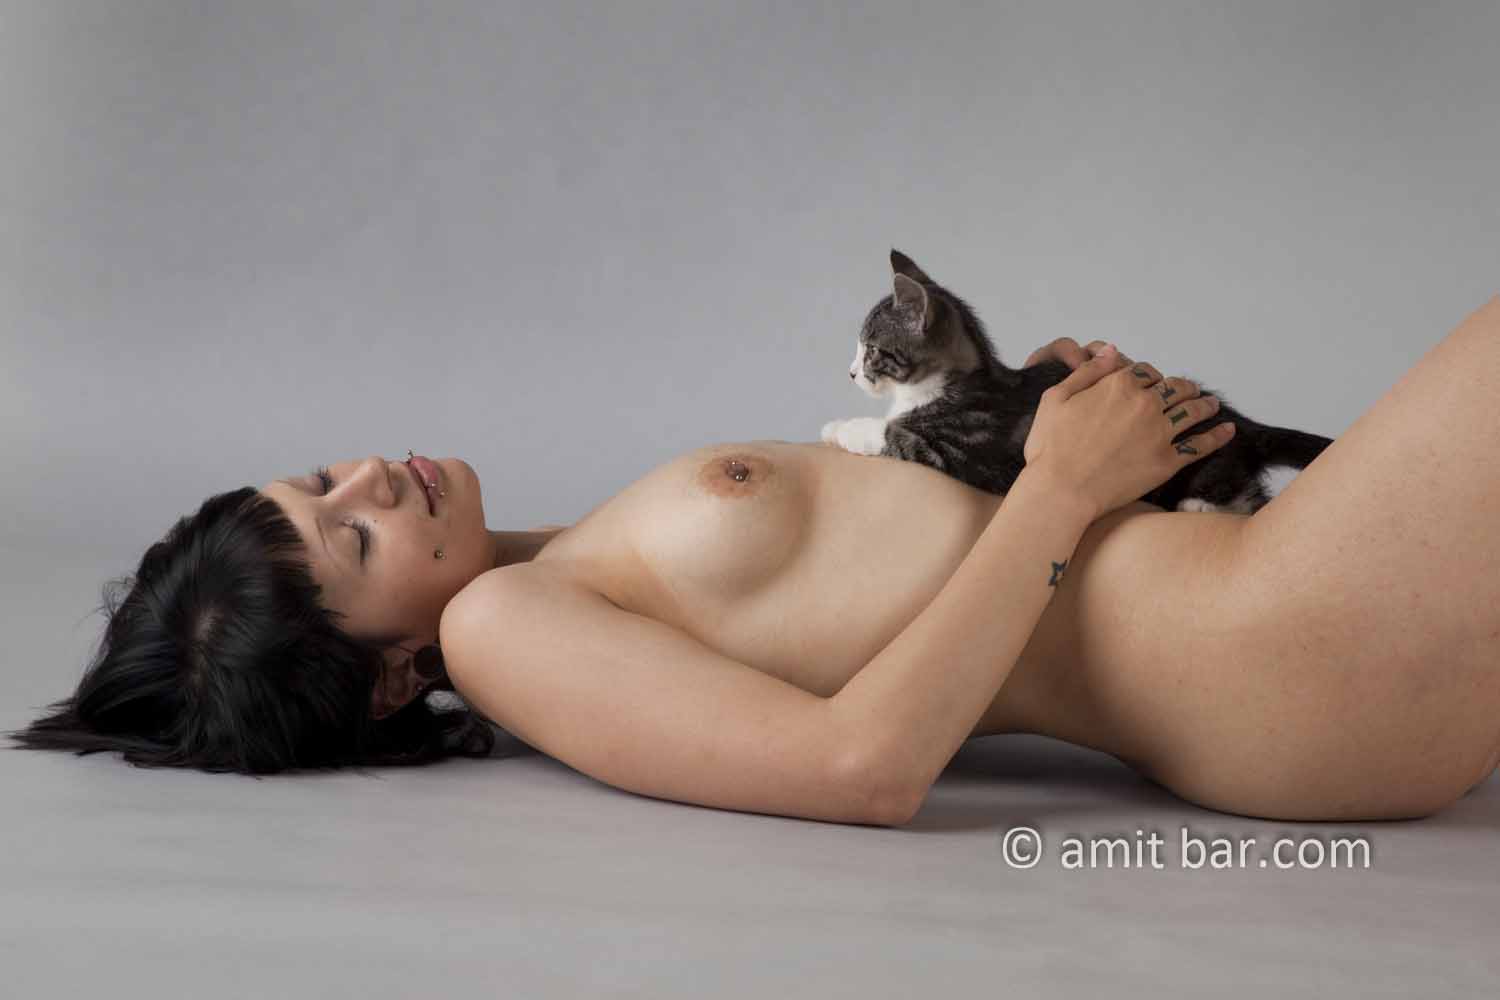 Pussycat: Nude model with young cat